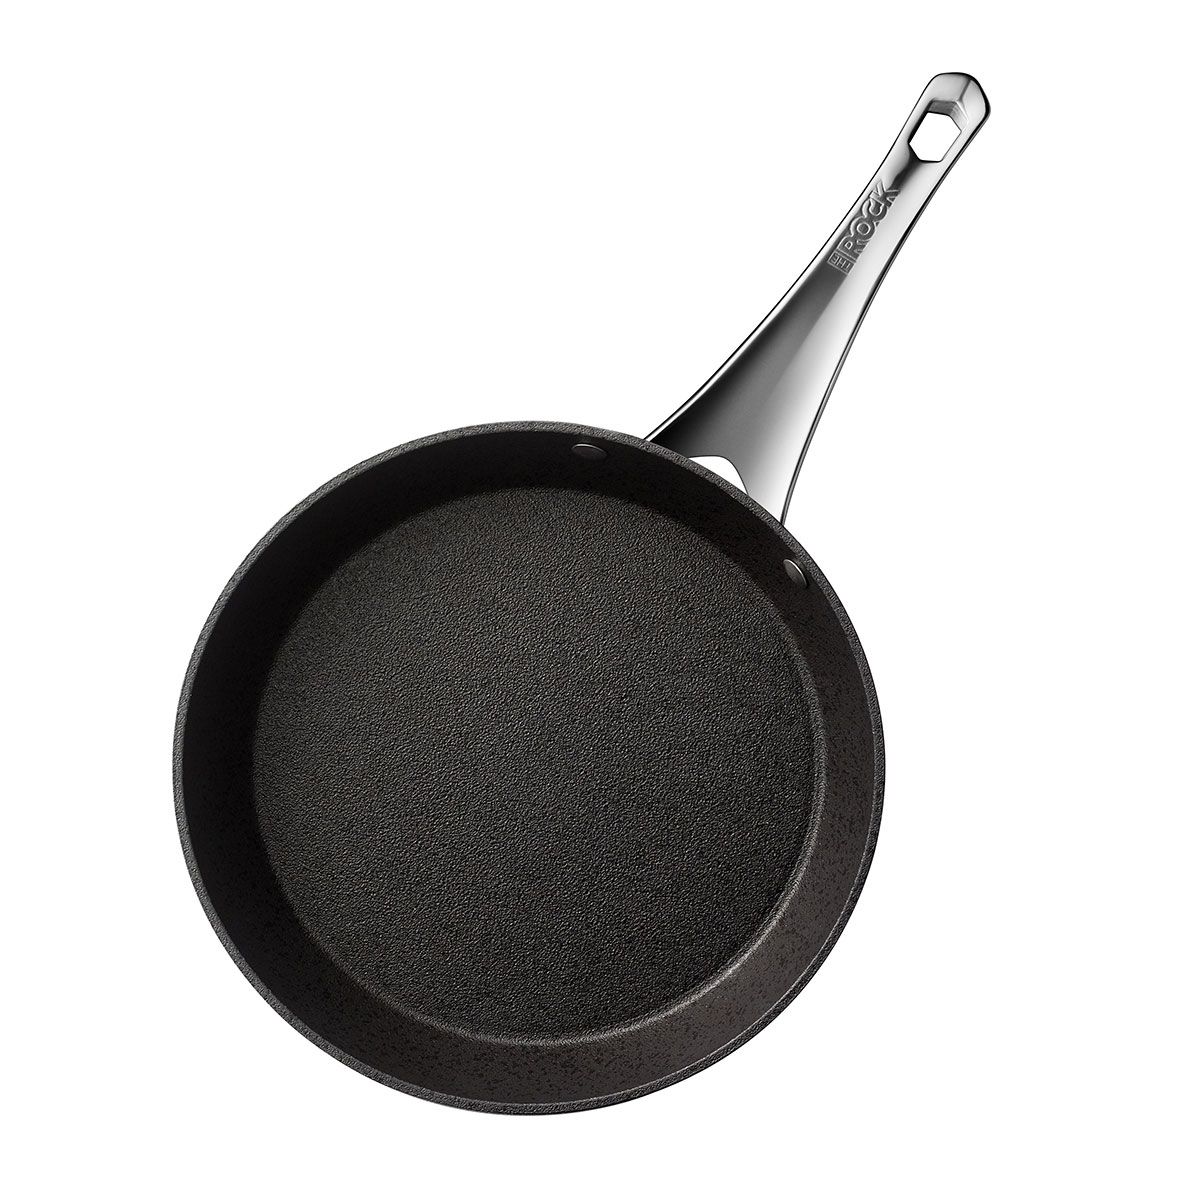 Heritage The Rock Stainless Steel - 12 (30cm) Fry Pan